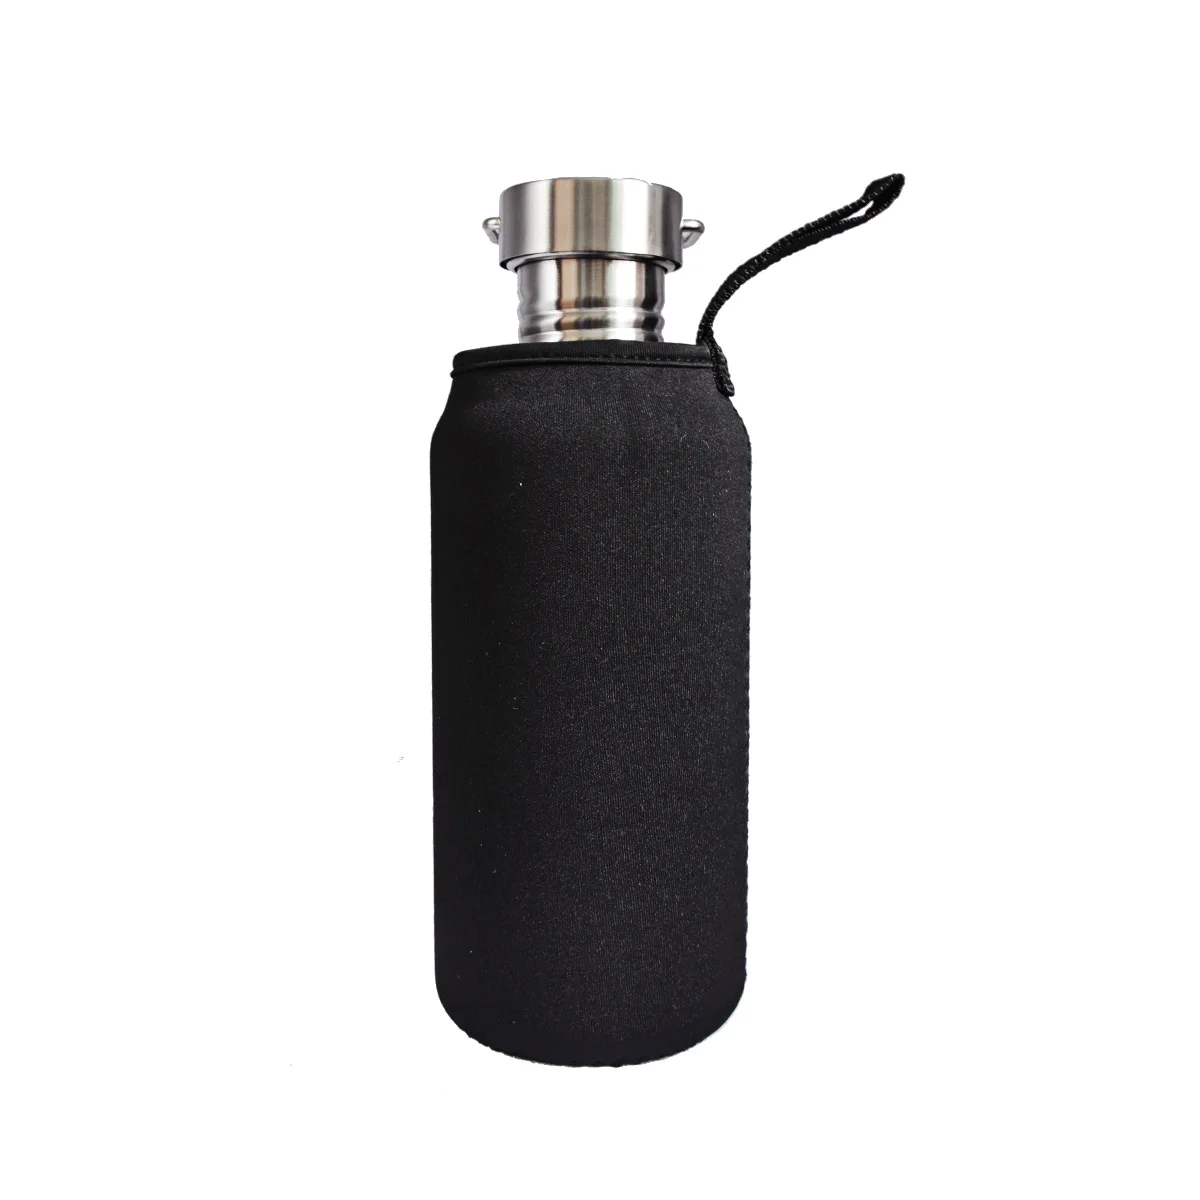 

1200ml Big Eco Friendly Sports Water Bottles With Bag Healthy All Stainless Steel BPA Free Space Bottle Travel Drinking Flask